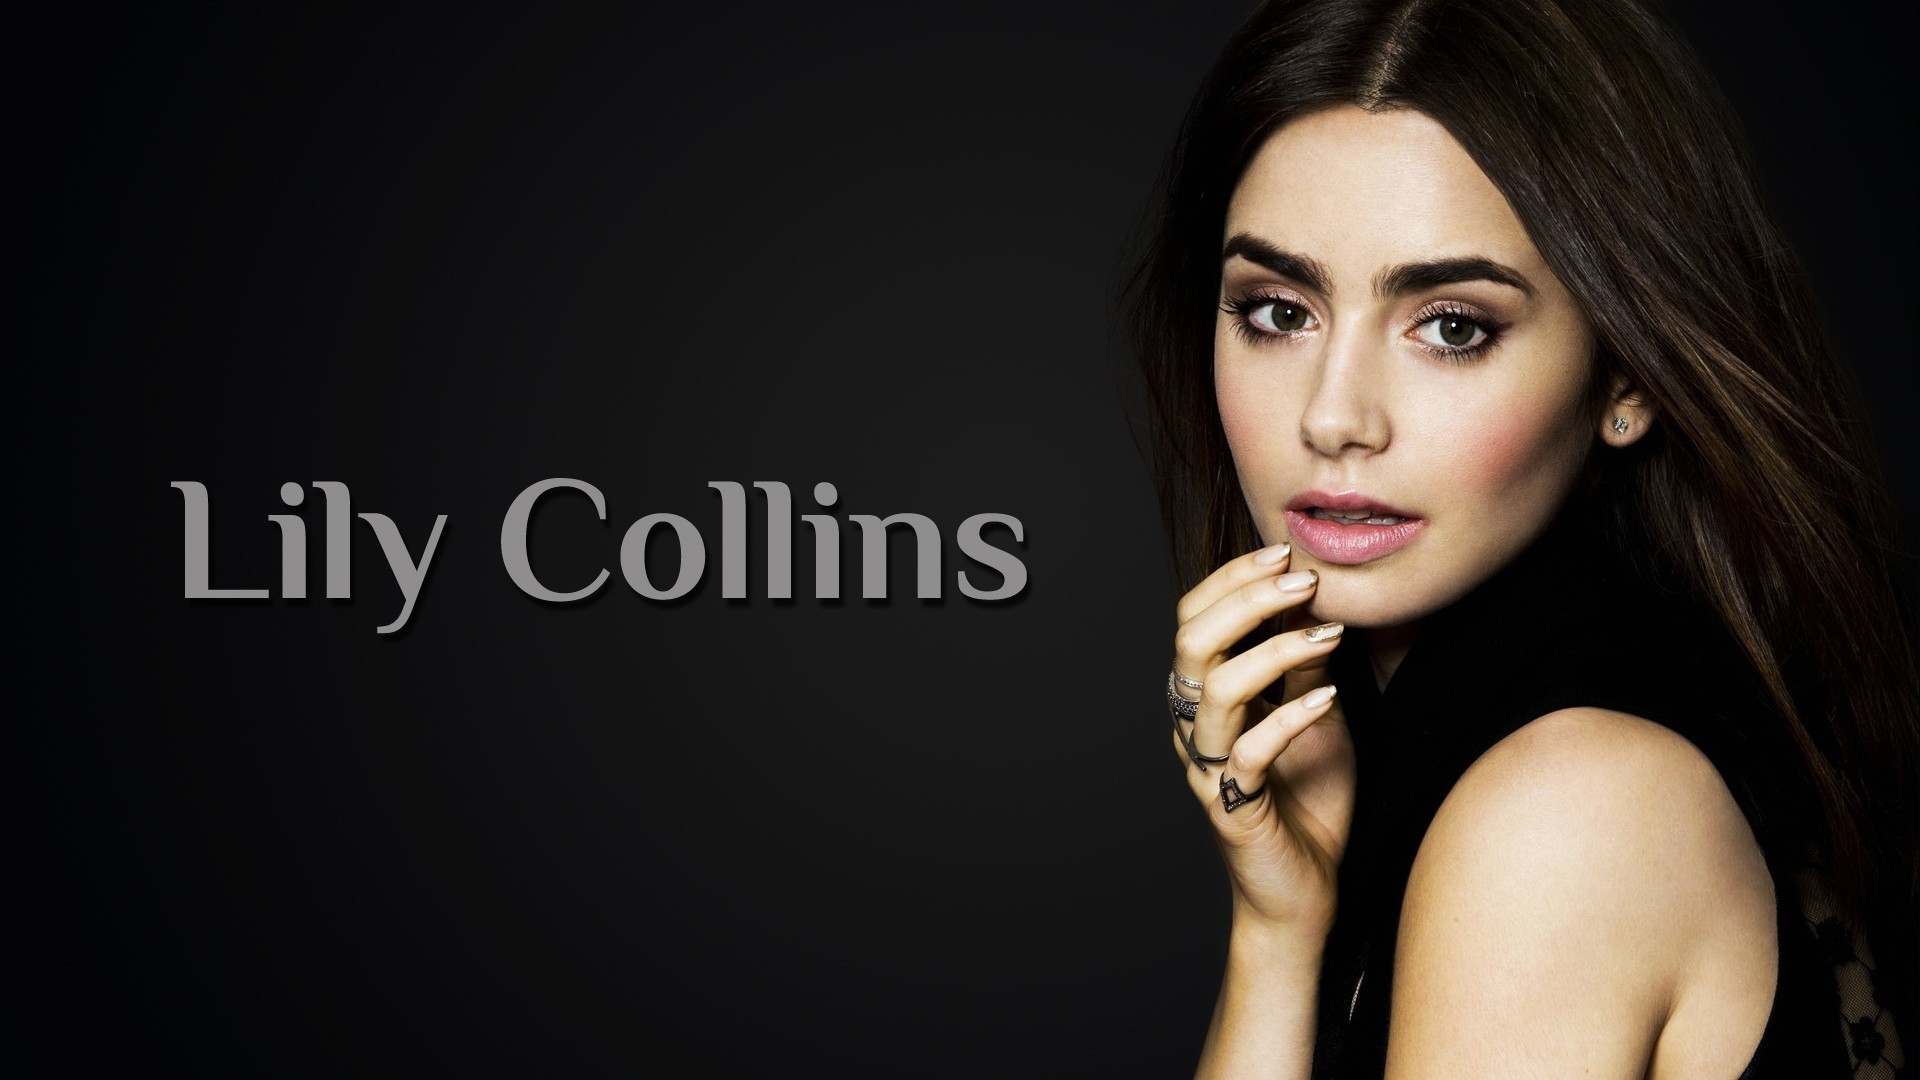 1920x1080 Lily Collins Wallpapers Awesome Misha Collins Wallpapers 65 Images Of Lily Collins  Wallpapers Awesome Misha Collins